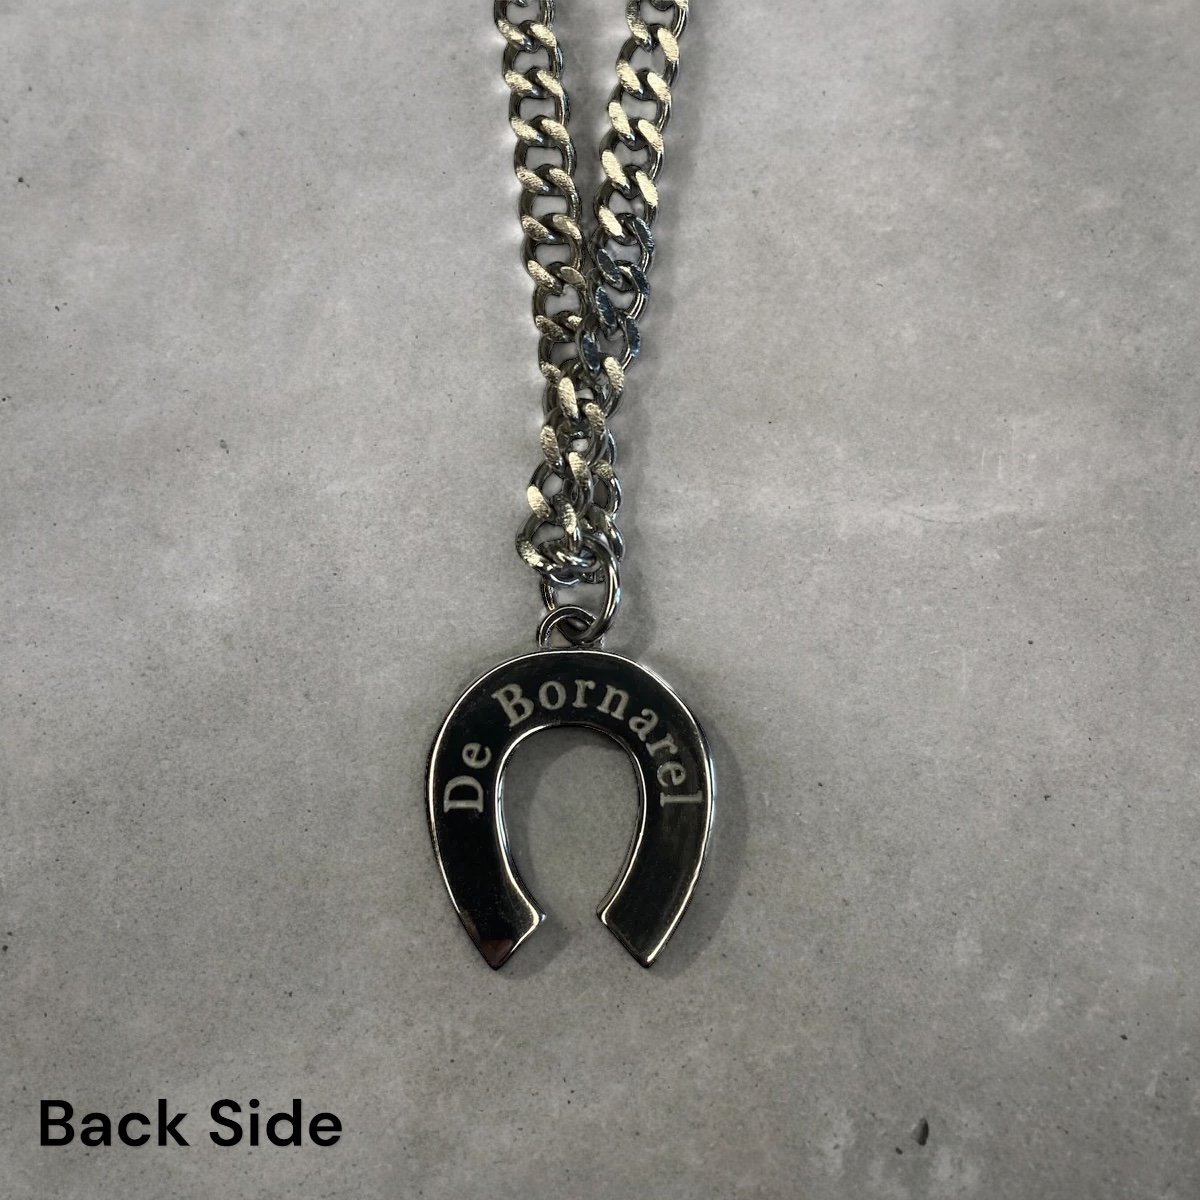 STEEL LUCKY NECKLACE 